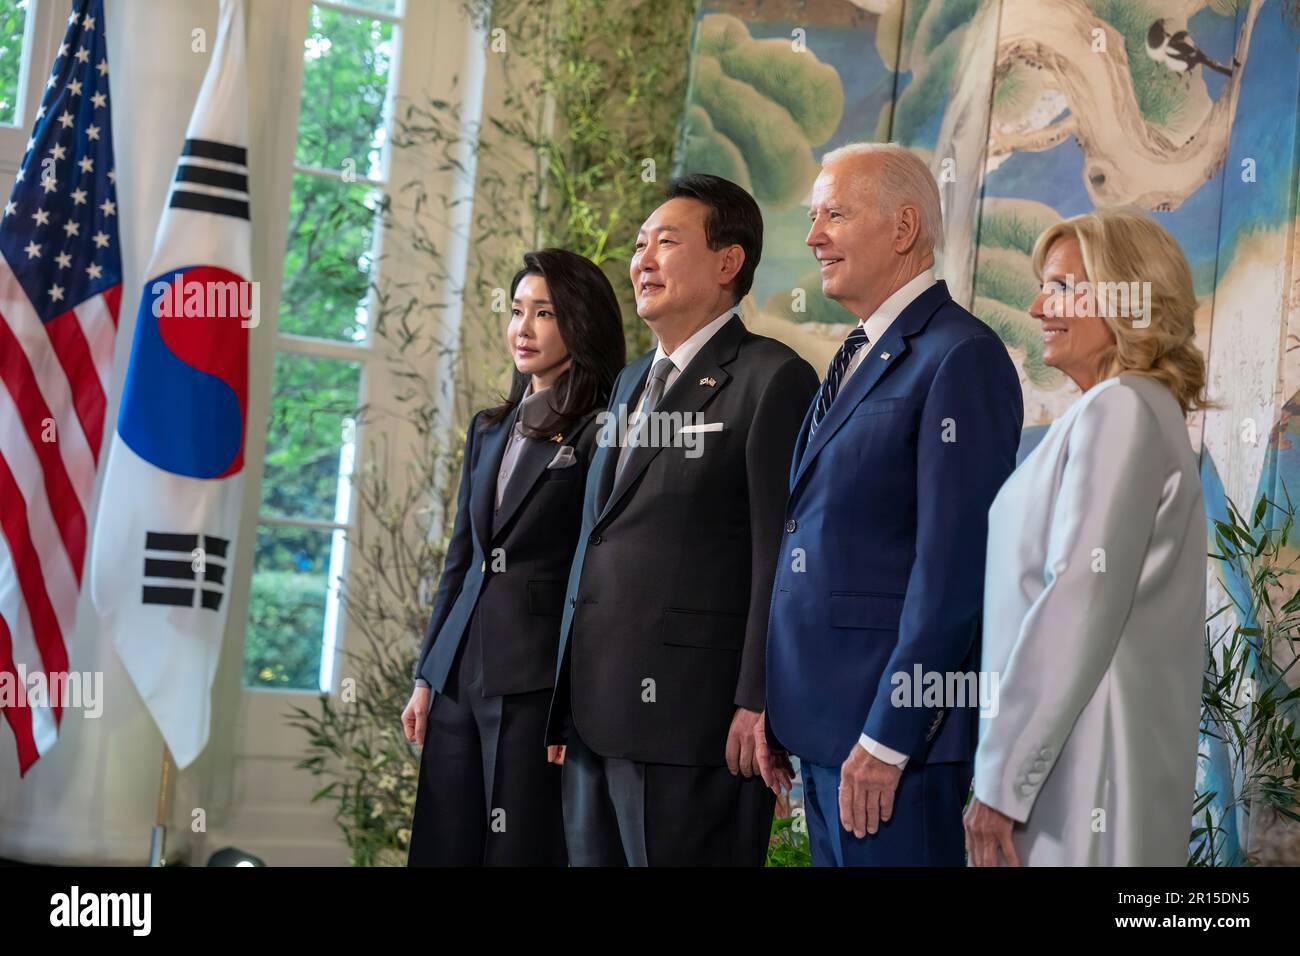 President Joe Biden and First Lady Jill Biden, President Yoon Suk Yeol of the Republic of Korea and First Lady of the Republic of Korea Mrs. Kim Keon Hee pose for a photo with the décor for the next day’s official State Arrival ceremony, Tuesday, April 25, 2023, in the Booksellers area of the White House. (Official White House Photo by Adam Schultz) Stock Photo